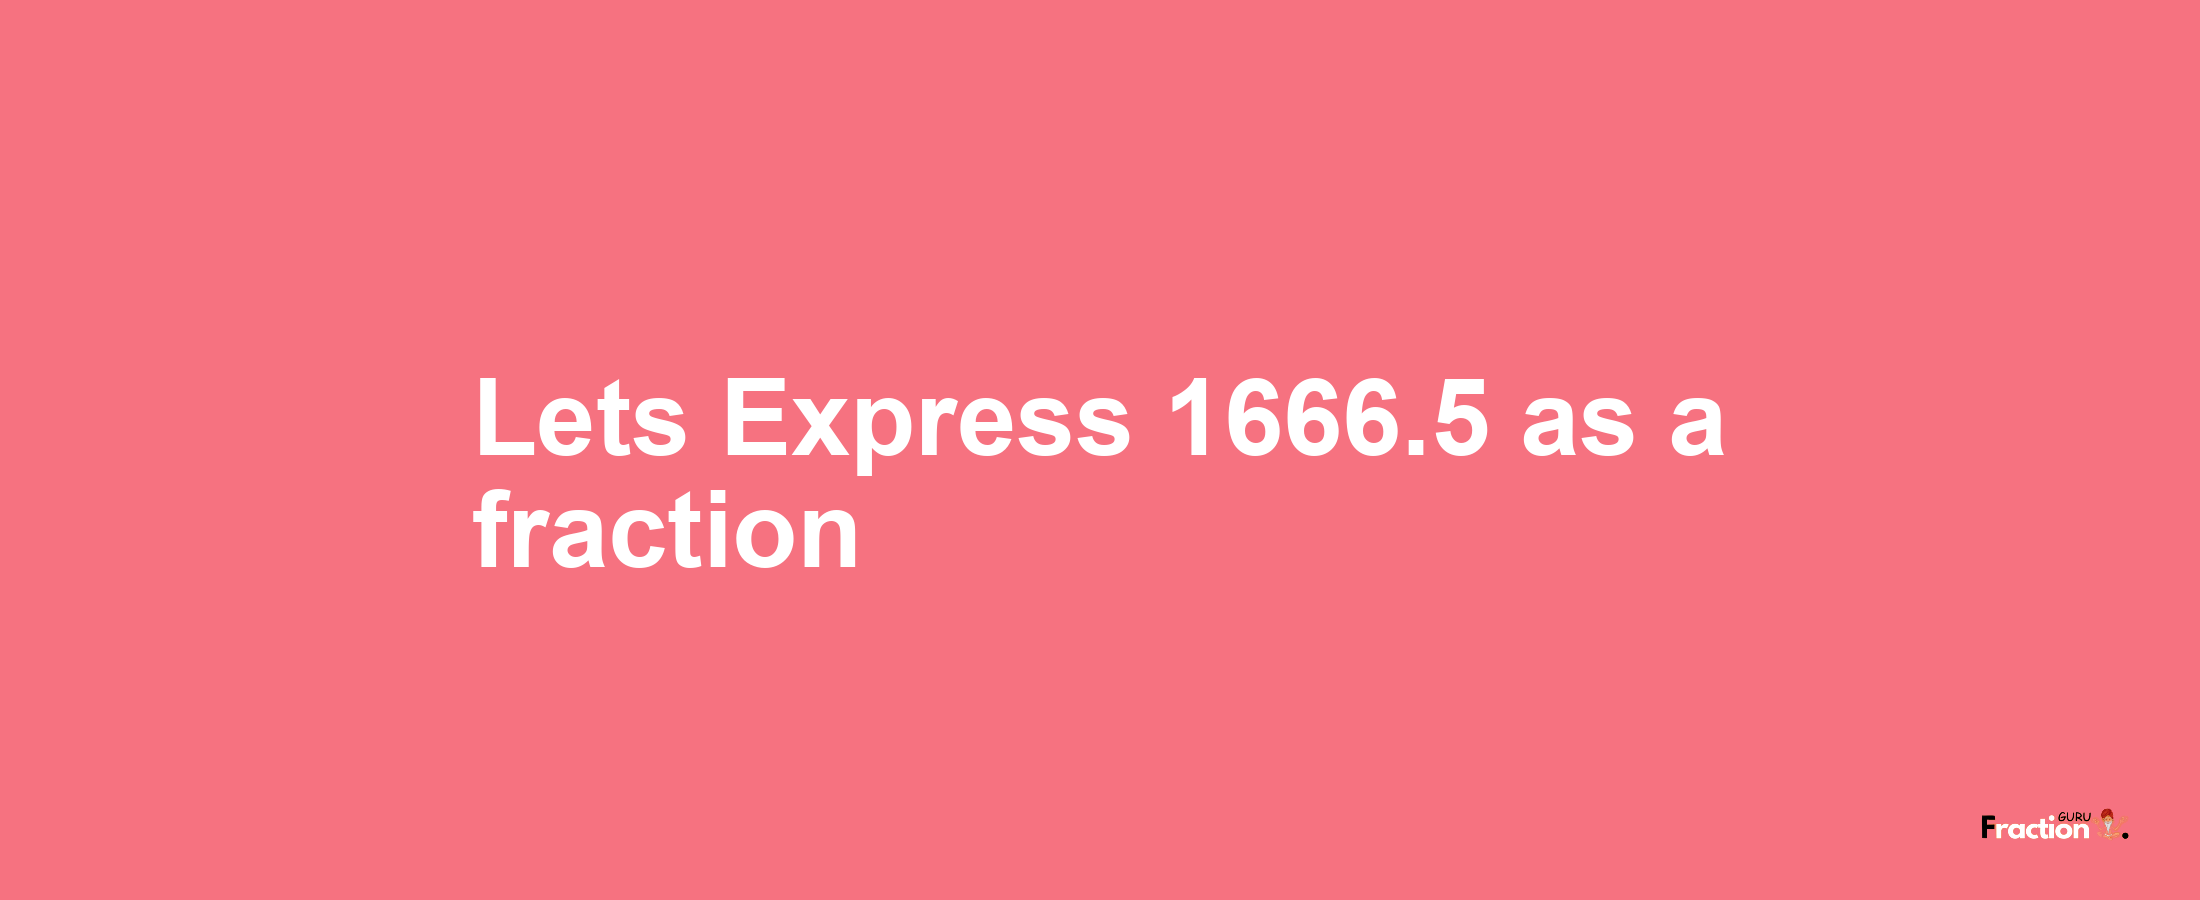 Lets Express 1666.5 as afraction